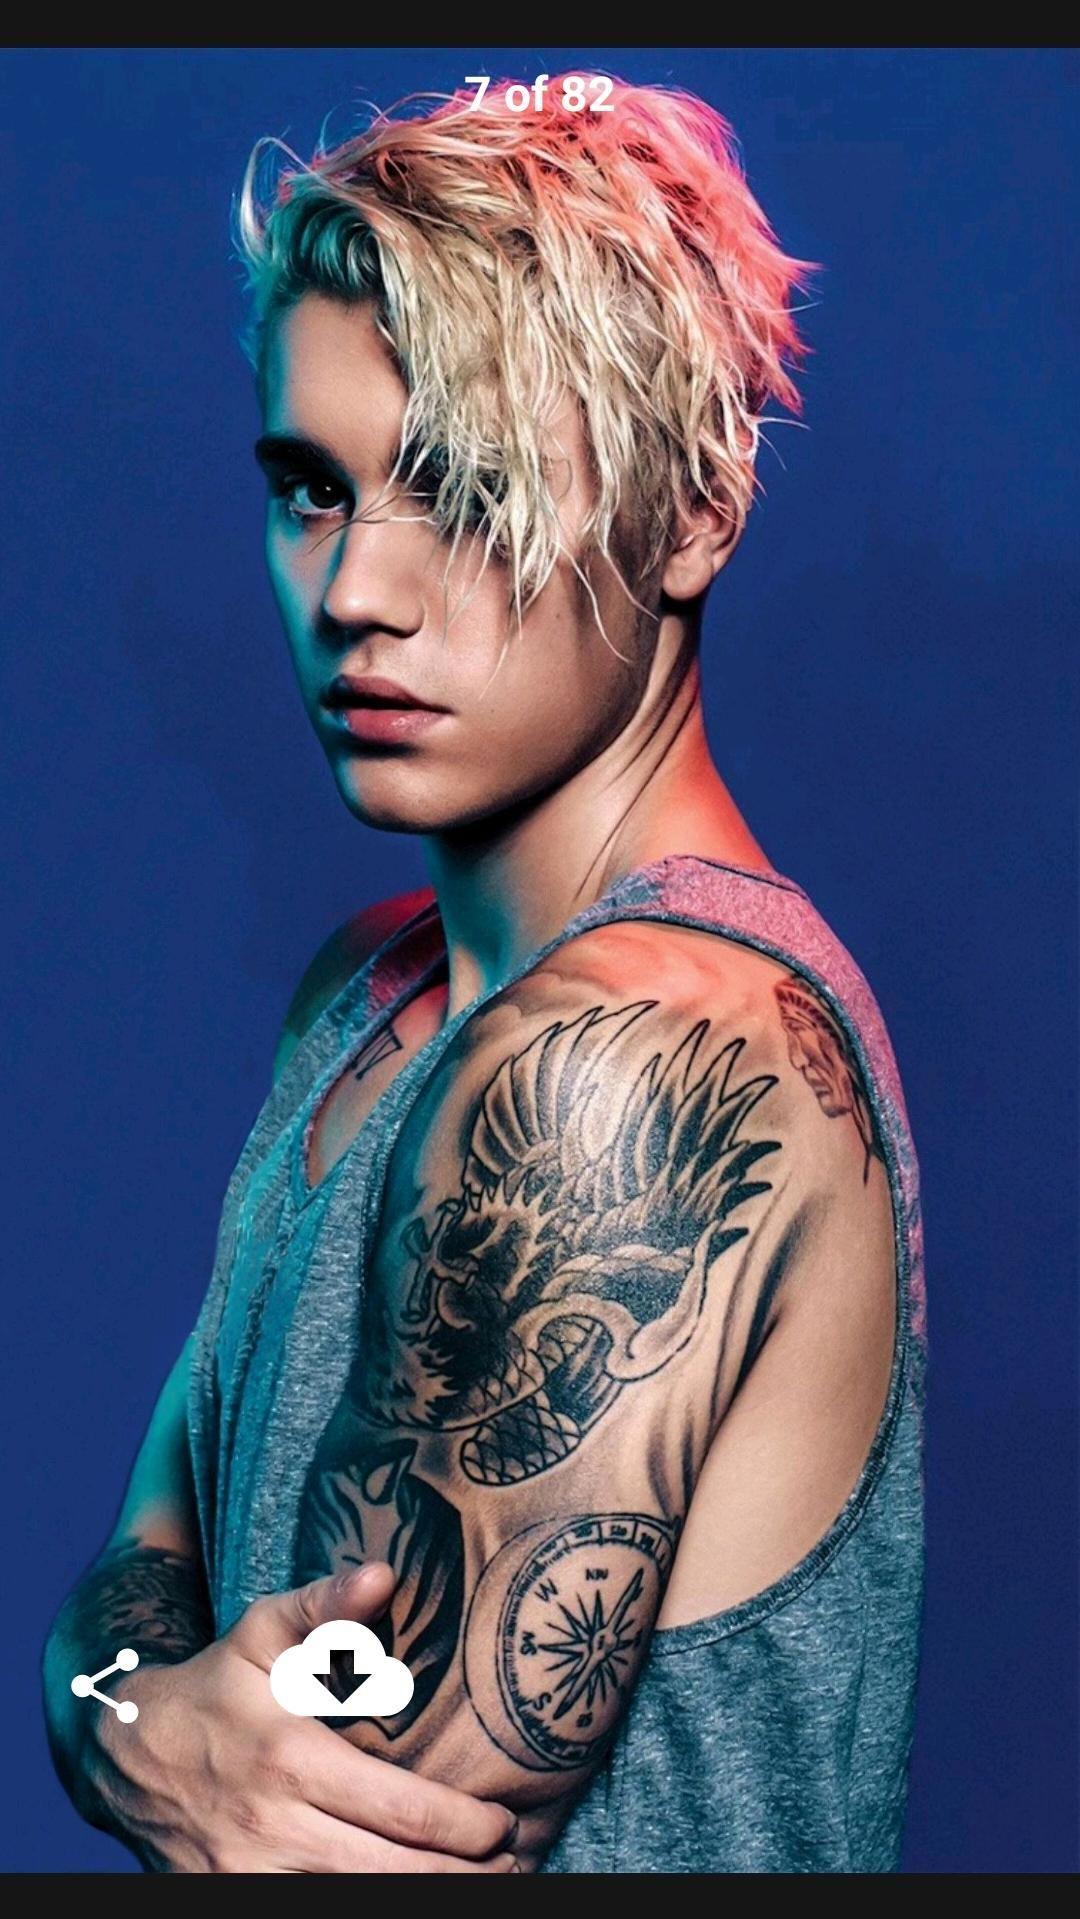 Justin Bieber Wallpapers on